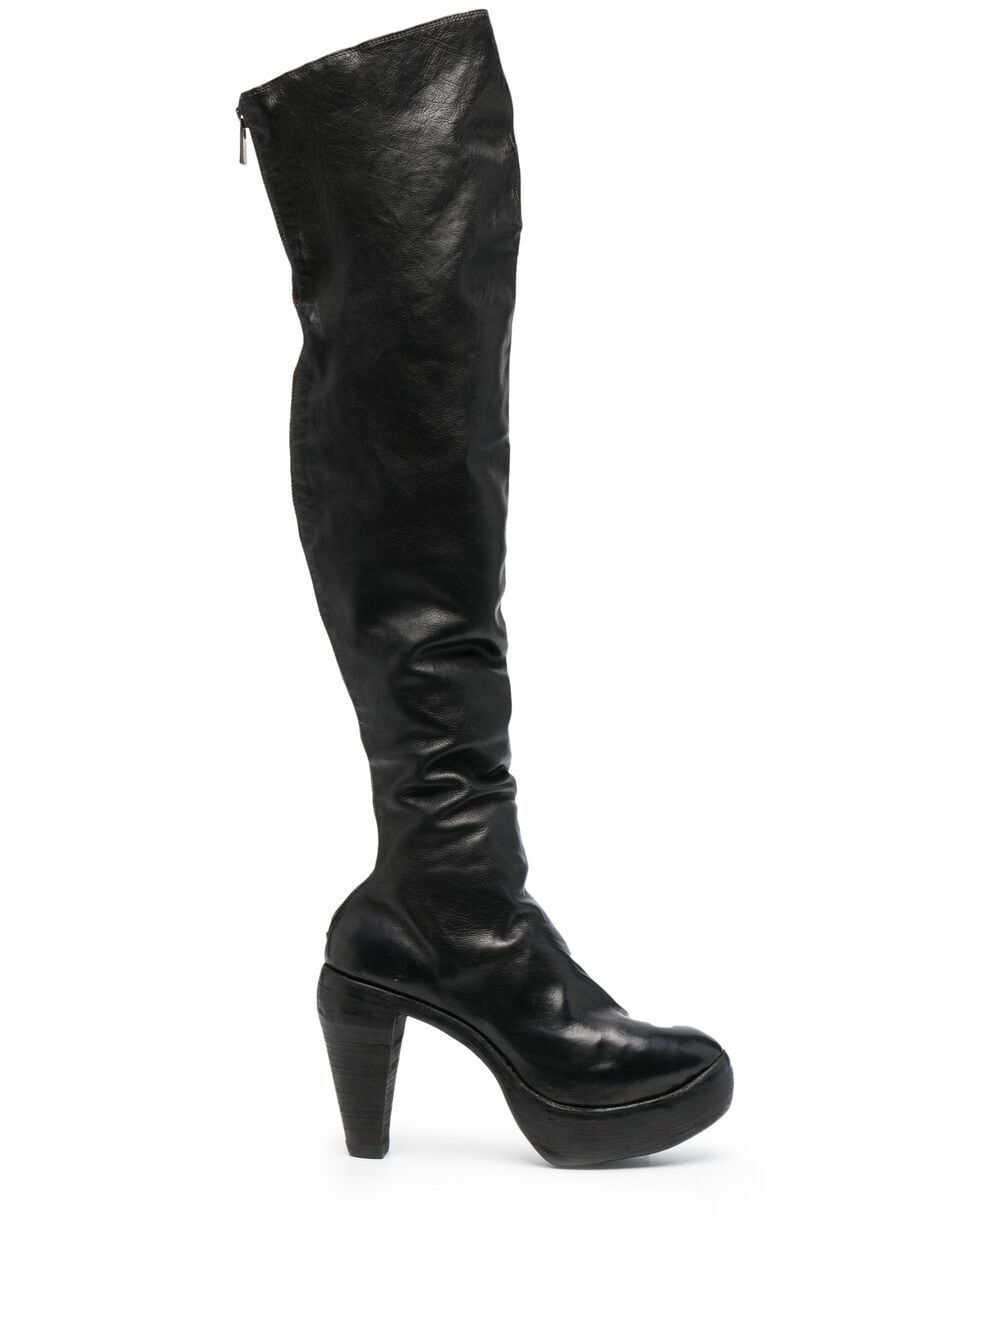 over-the-knee leather boots